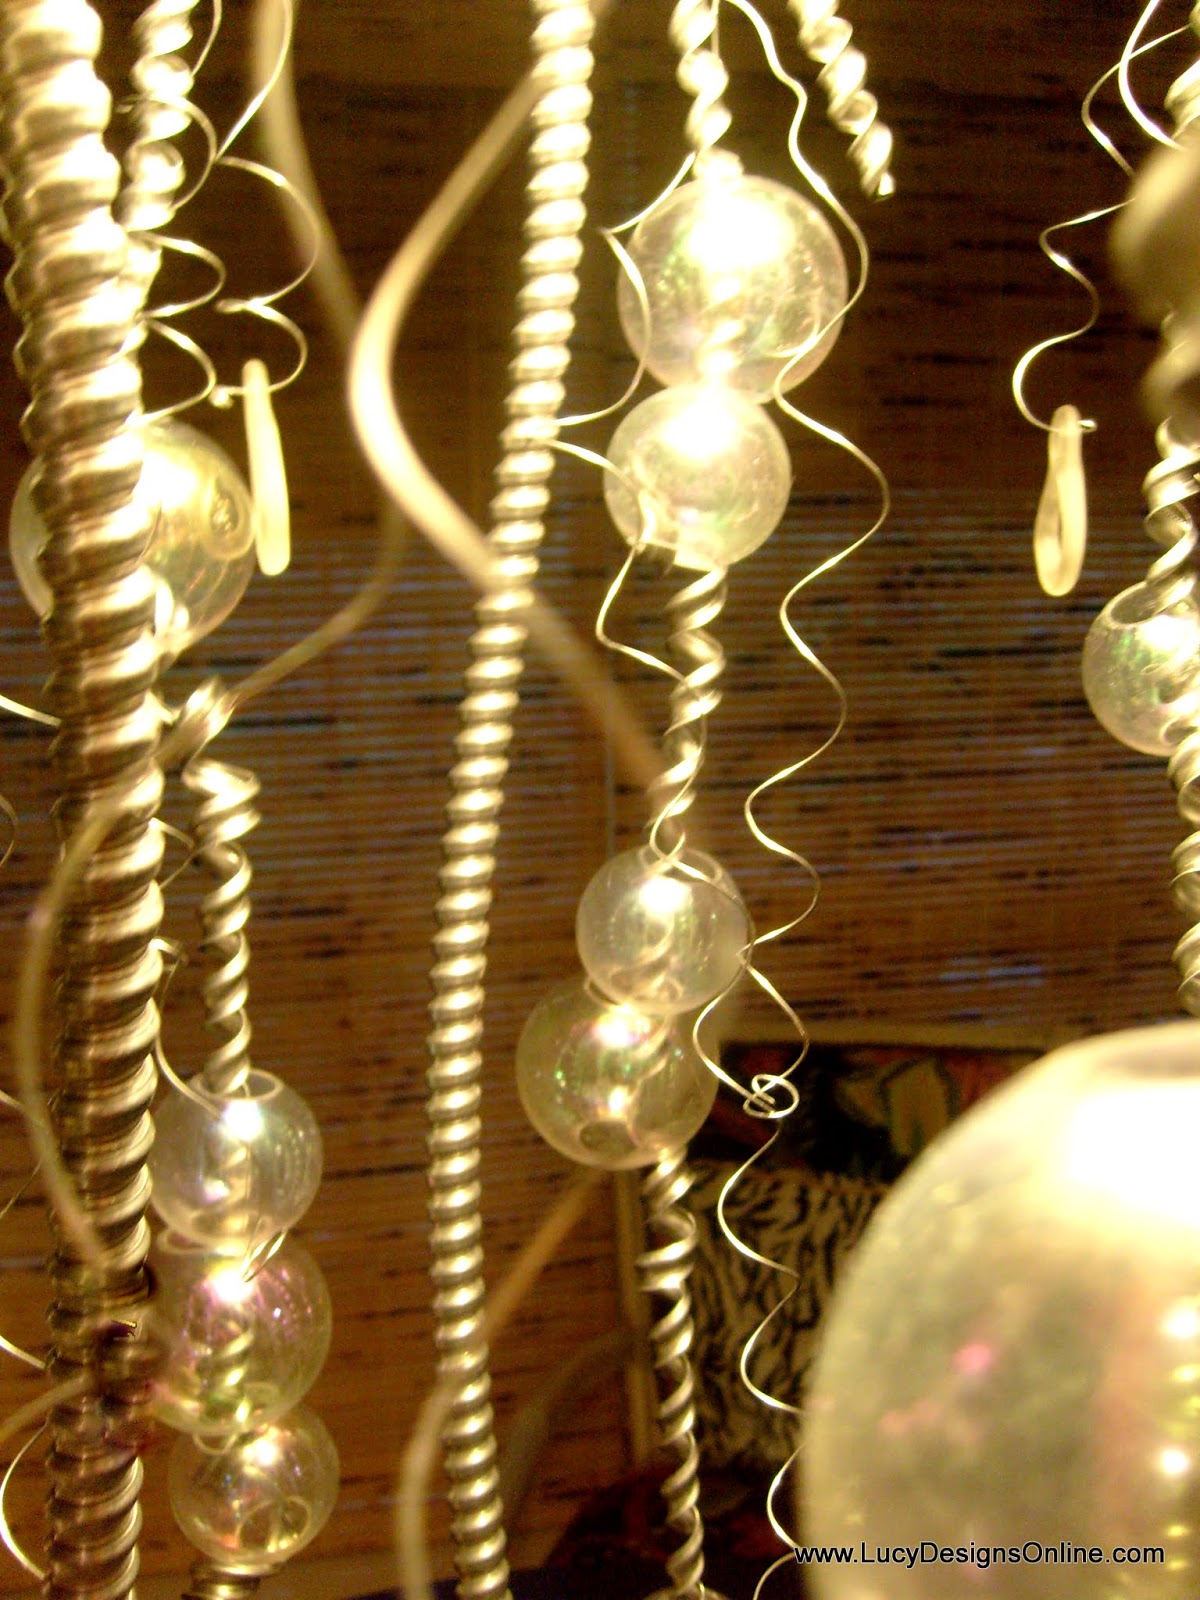 recycled wire and pendant lights into jellyfish lights